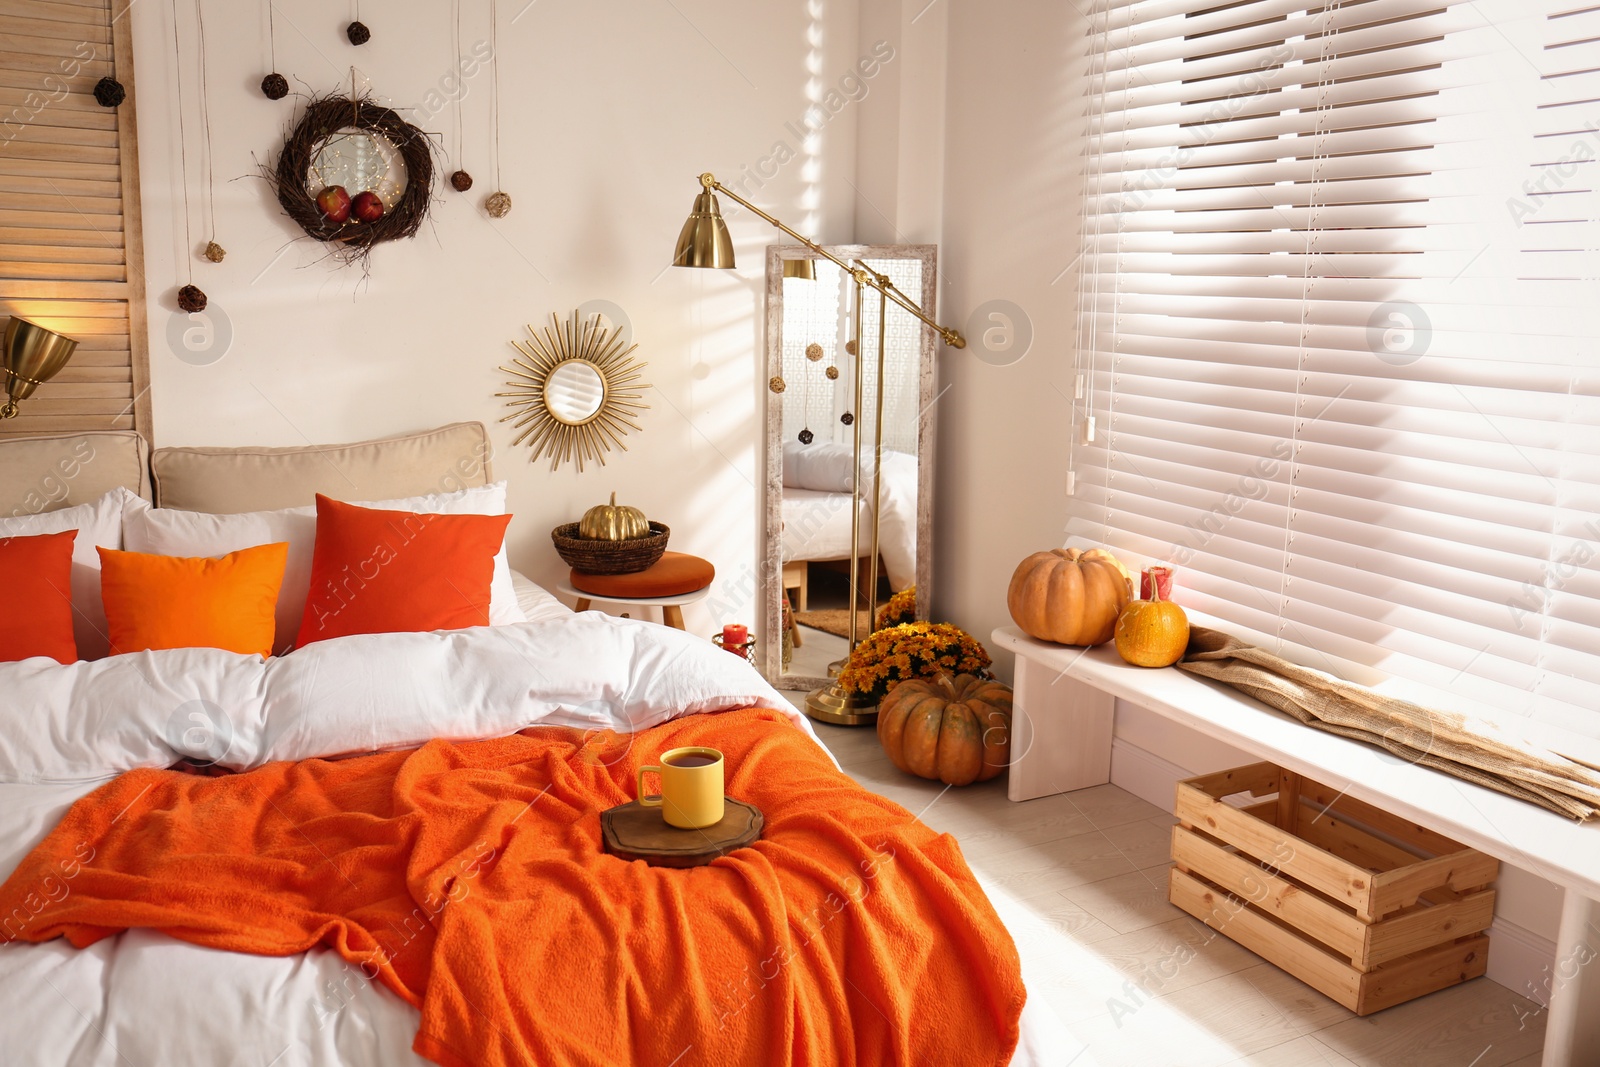 Photo of Cozy bedroom interior inspired by autumn colors